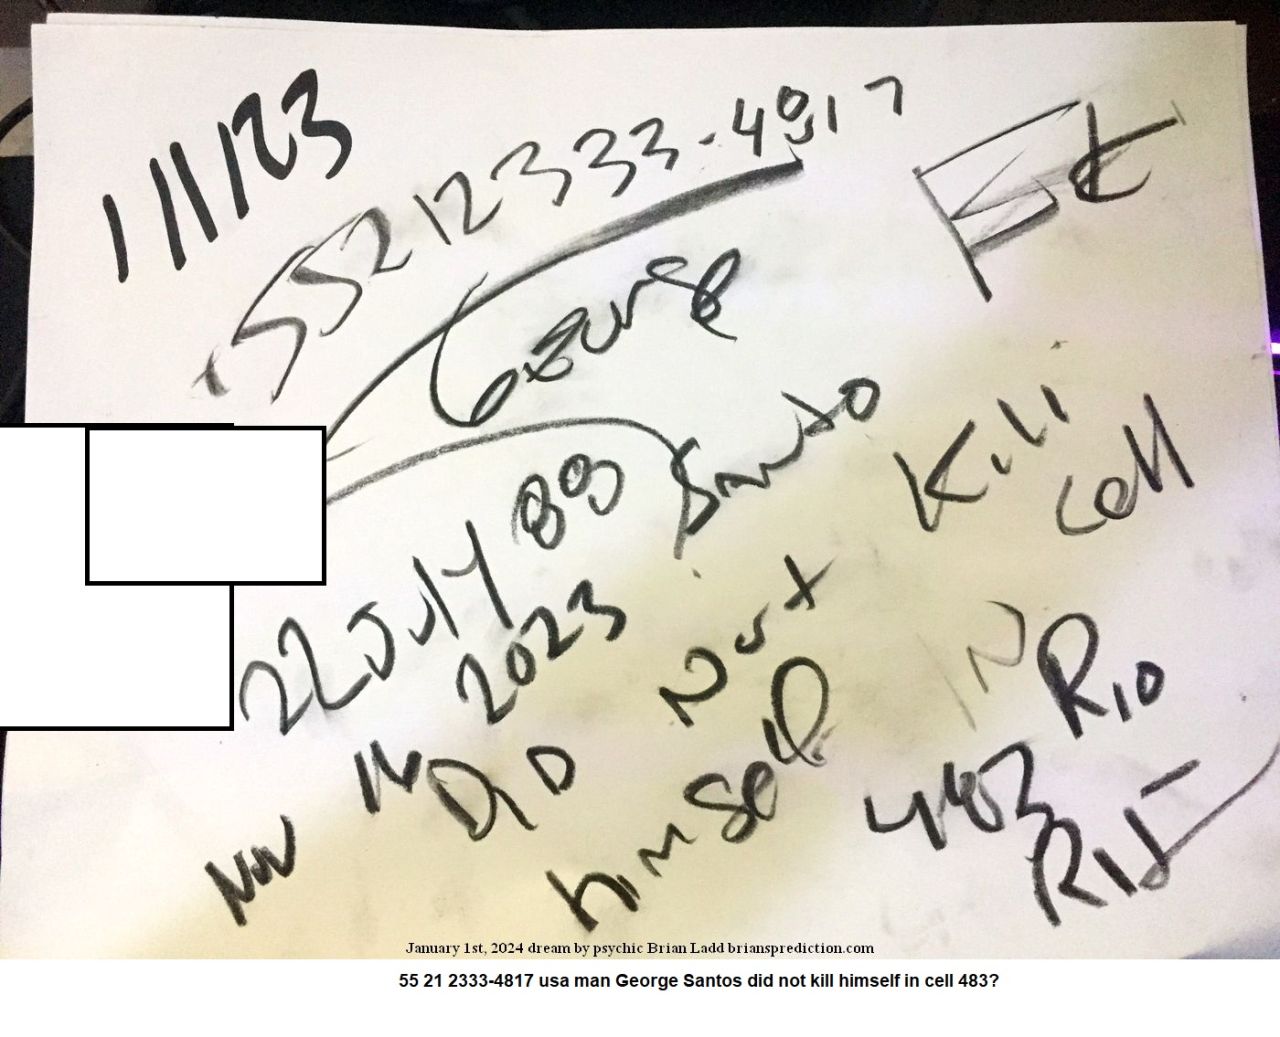 1 jan 2023 1 55 21 2333-4817 usa man George Santos did not kill himself in cell 483?
55 21 2333-4817 usa man George Santos did not kill himself in cell 483?
